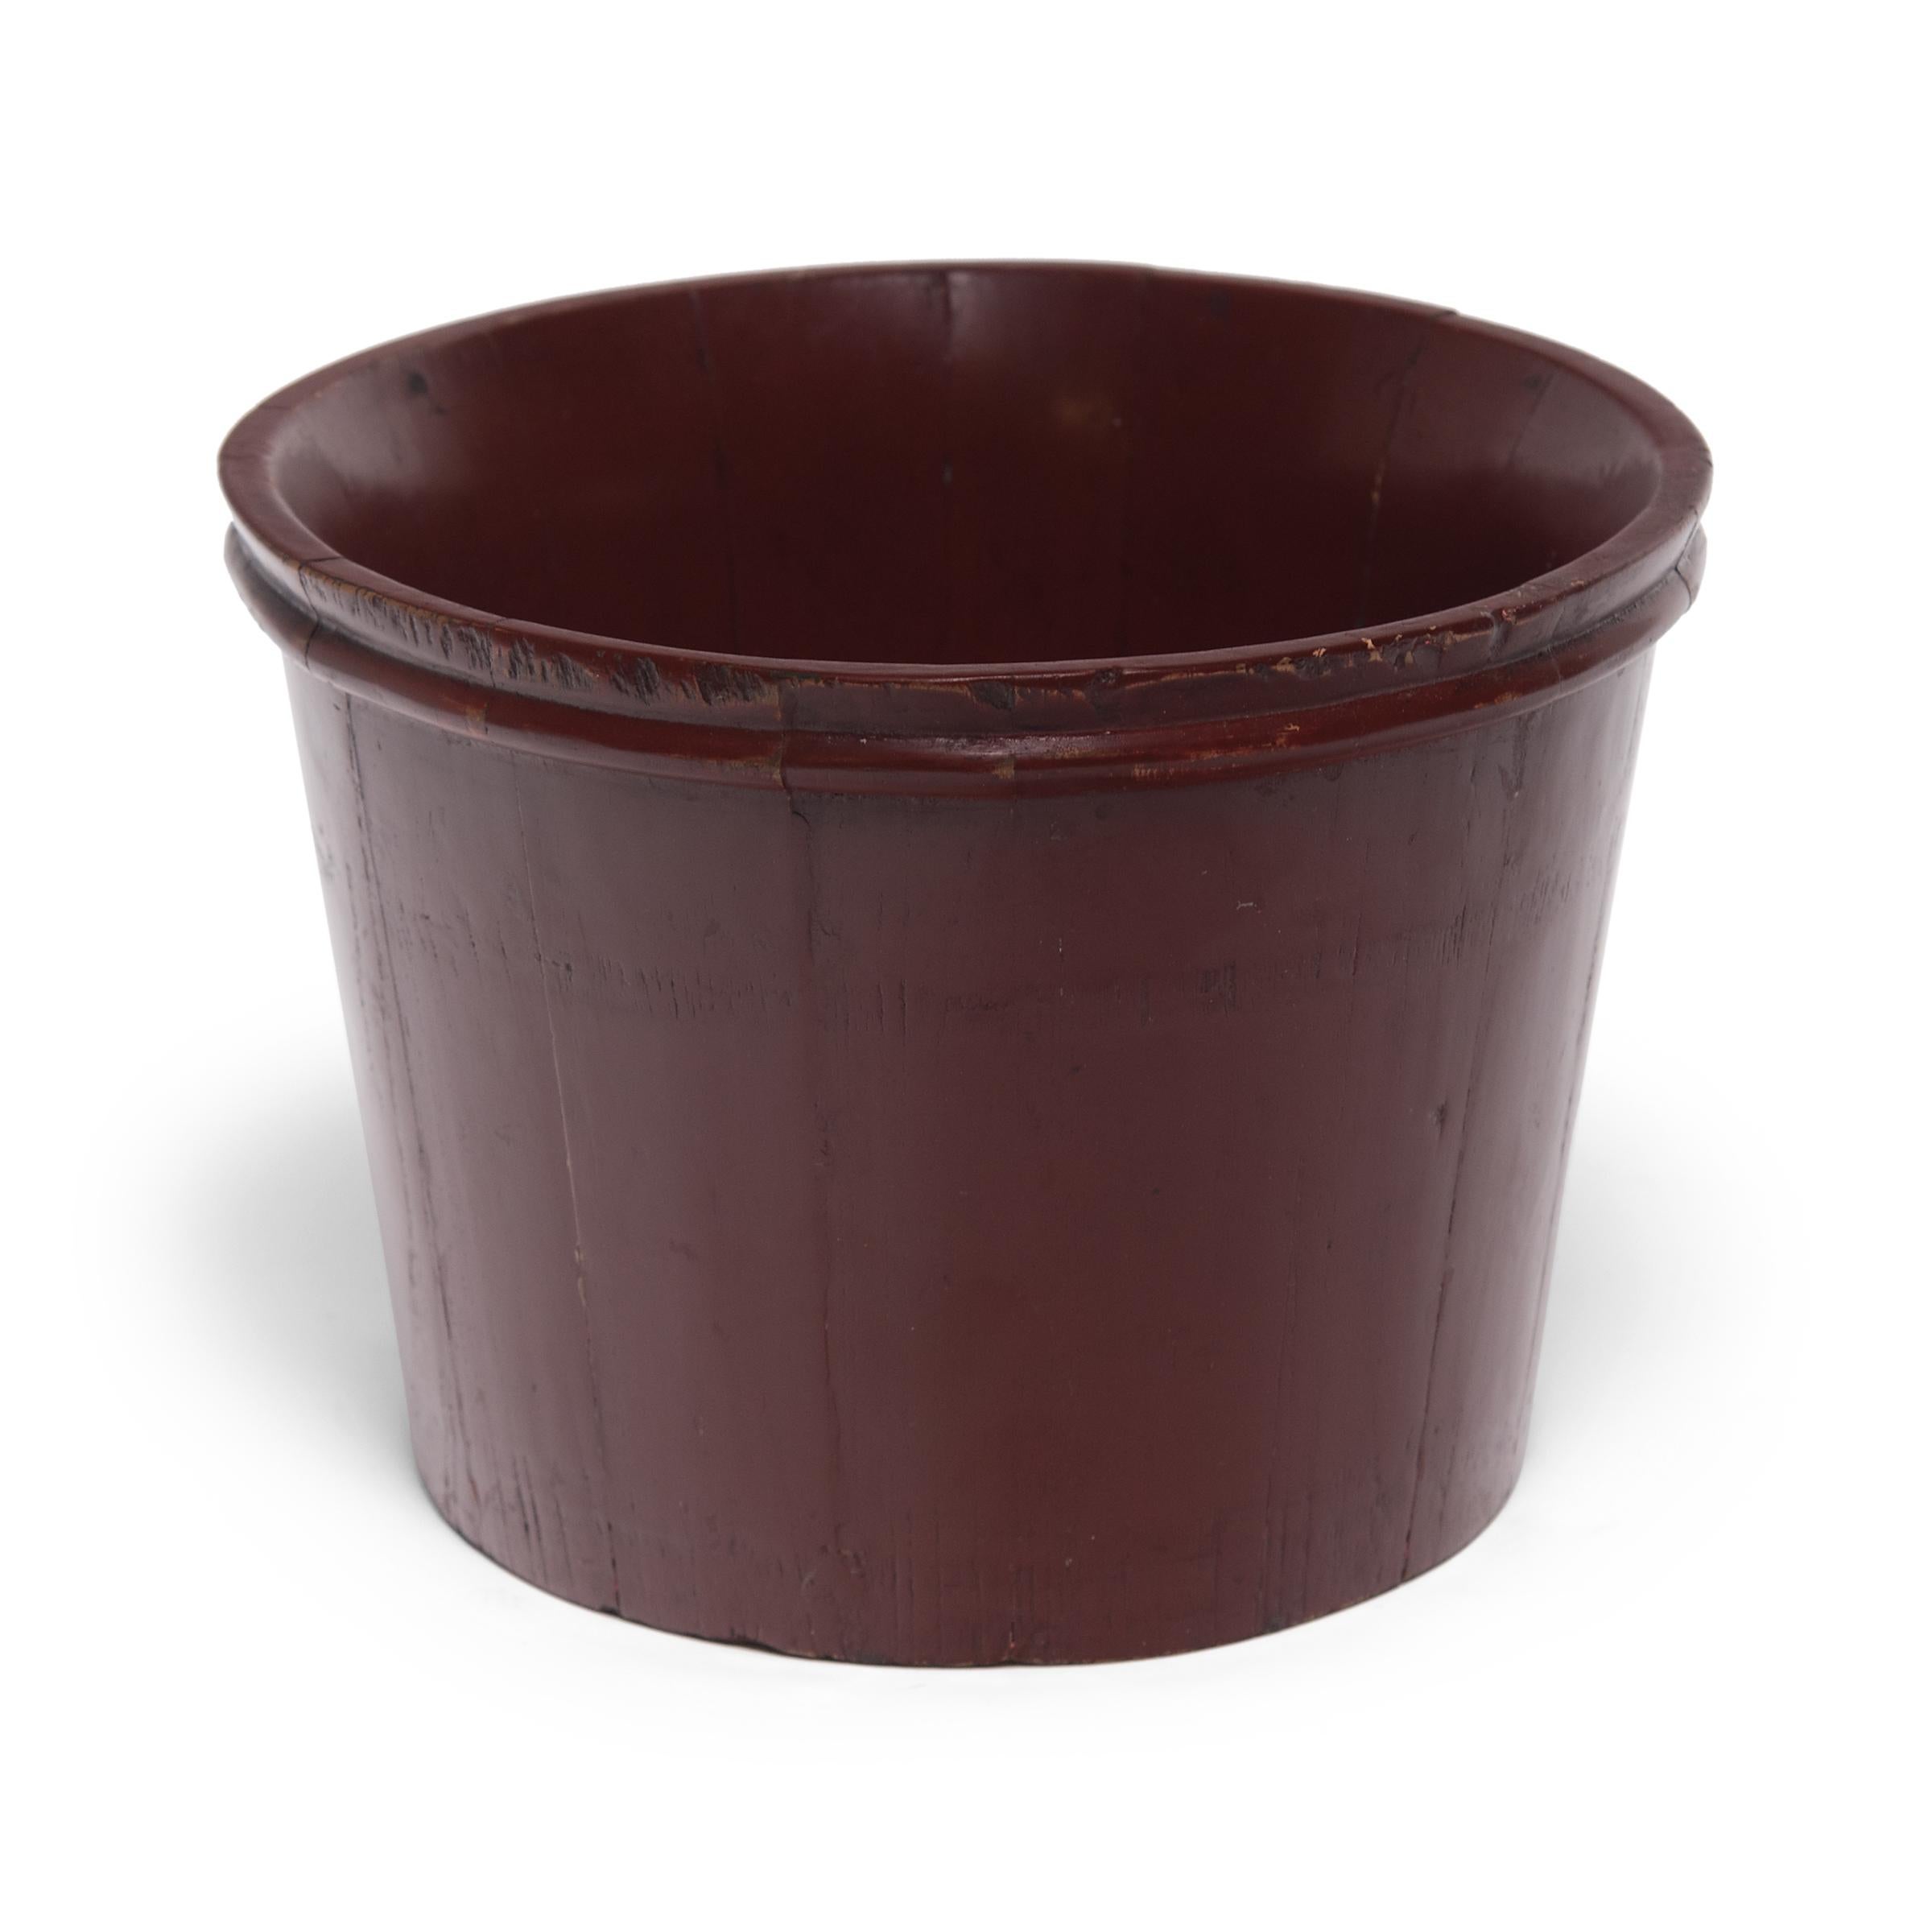 Layers and layers of glossy red lacquer render this water pail made of pine slats nearly seamless, giving it a sleek, burnished appearance. Once used to tote water, we find the vessel's timeless form and rich patina the perfect planter for lush